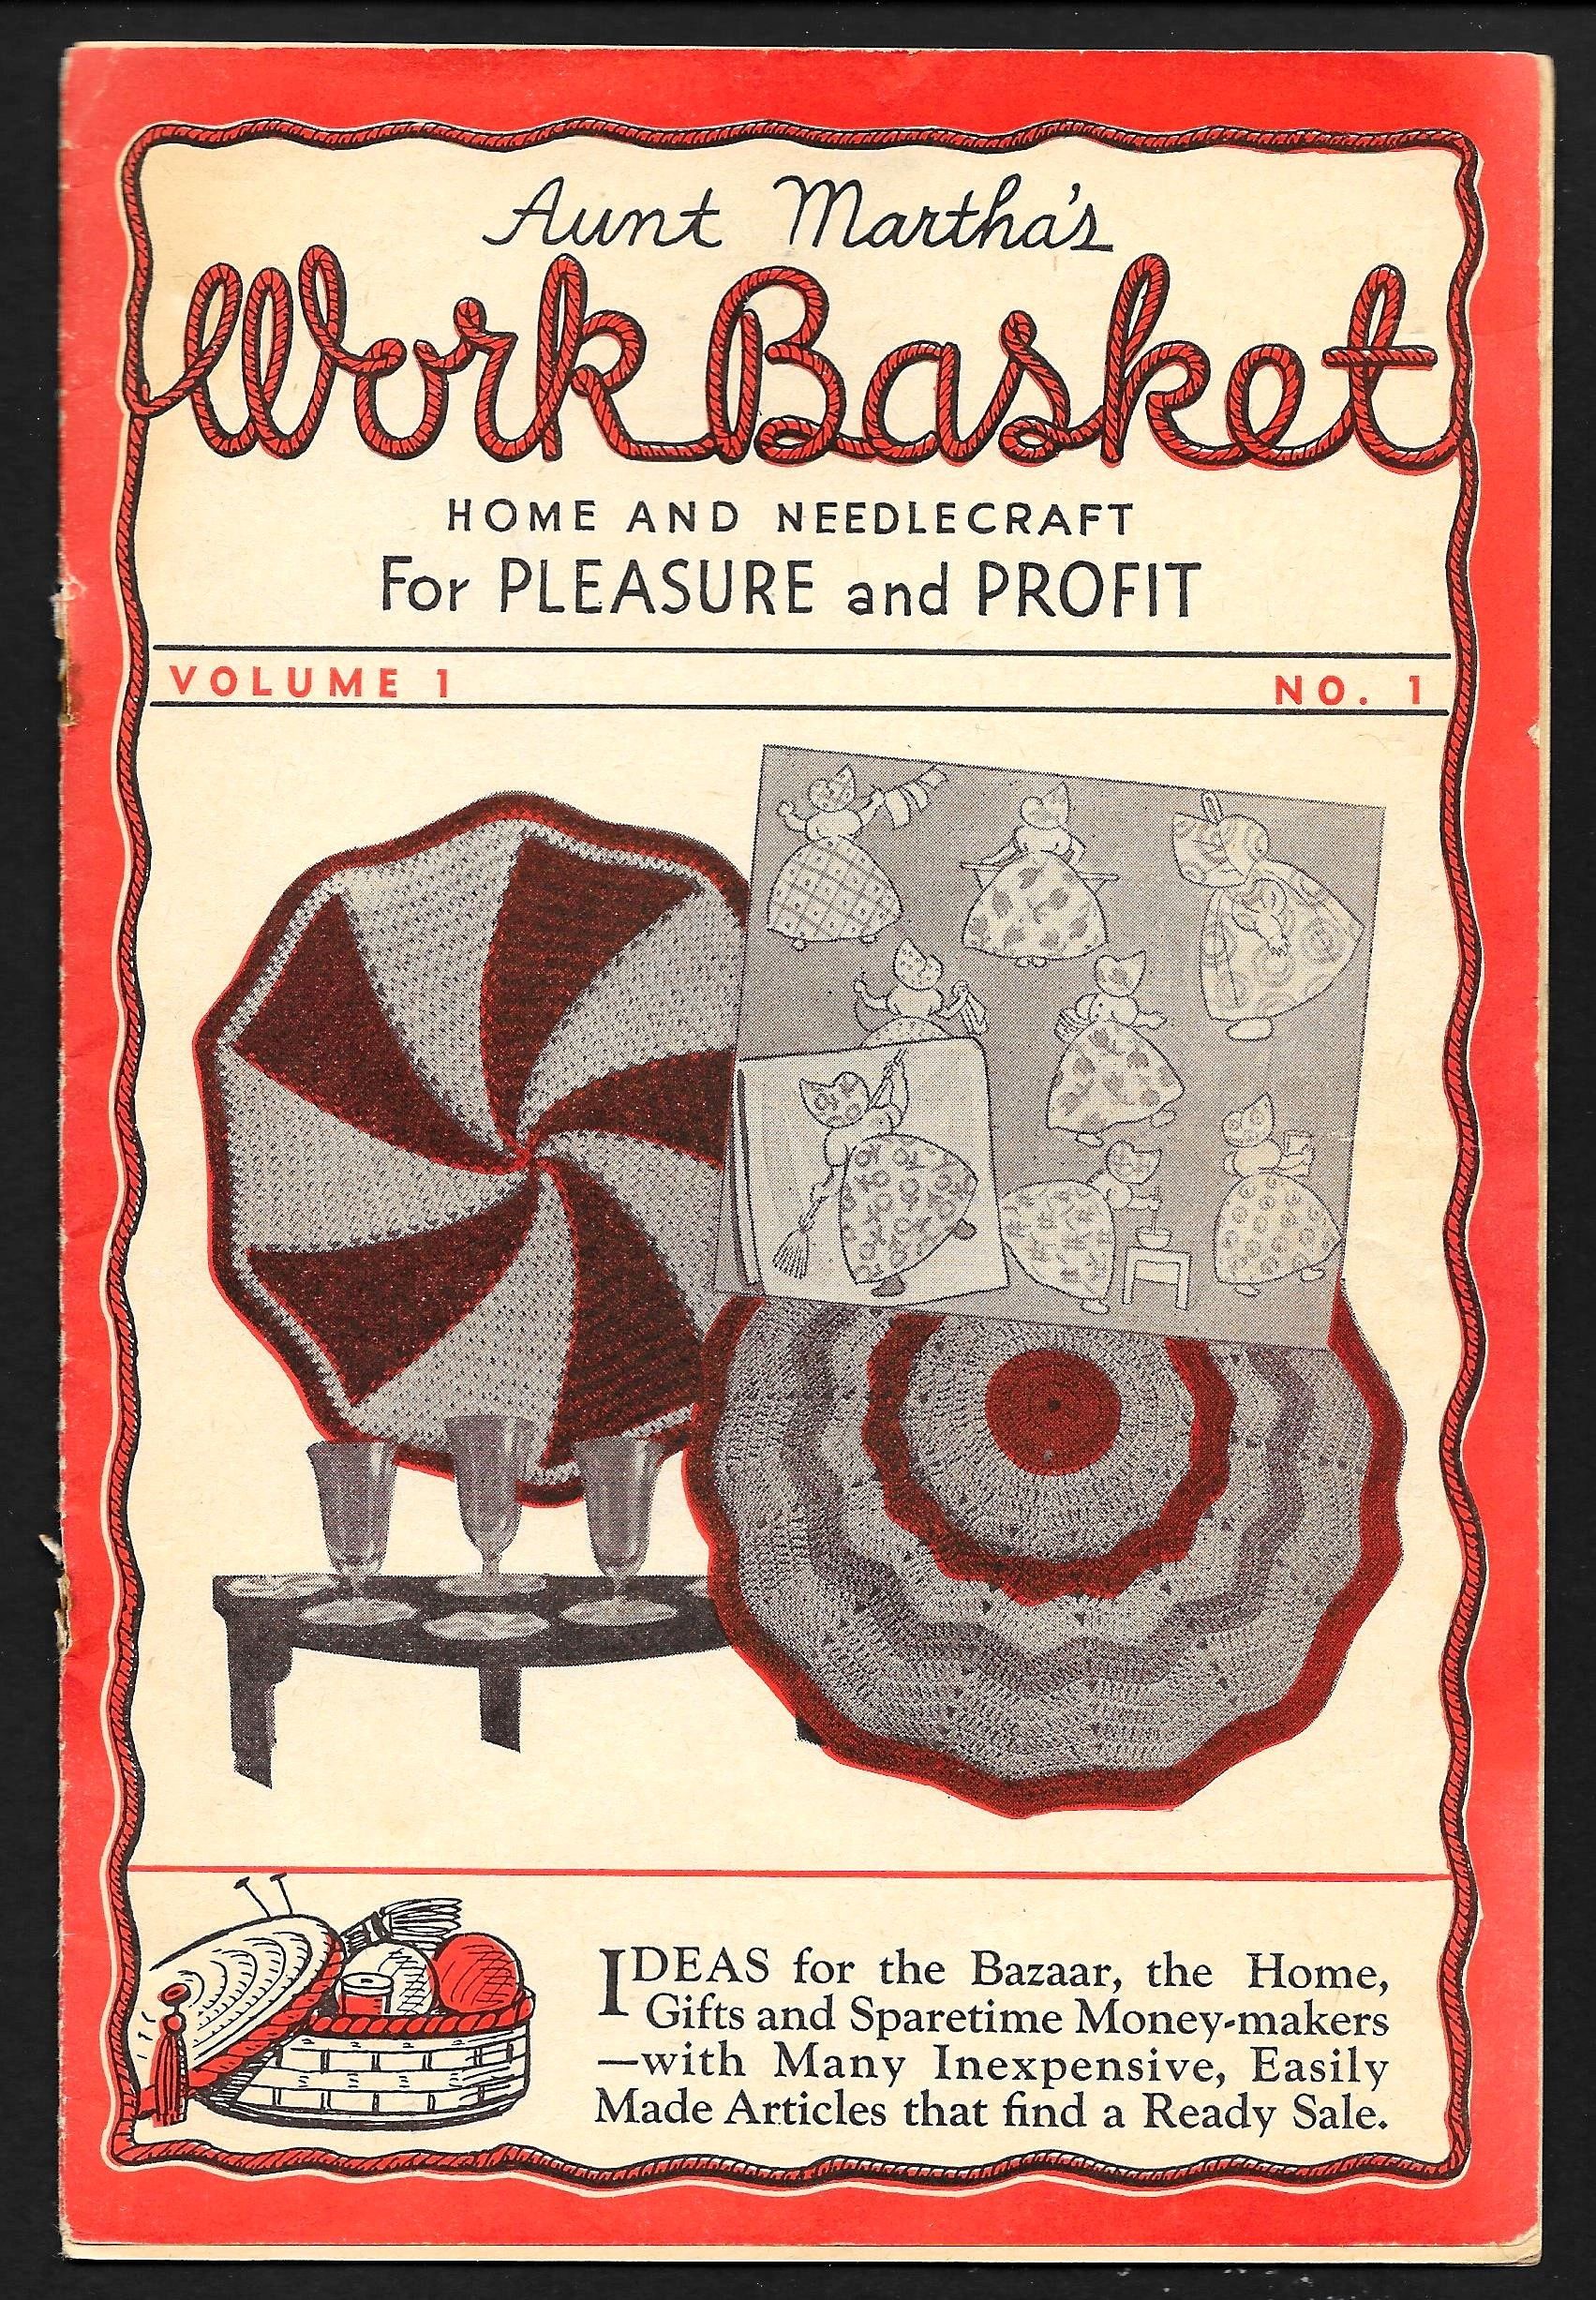 First issue of Workbasket Magazine published October 1935.